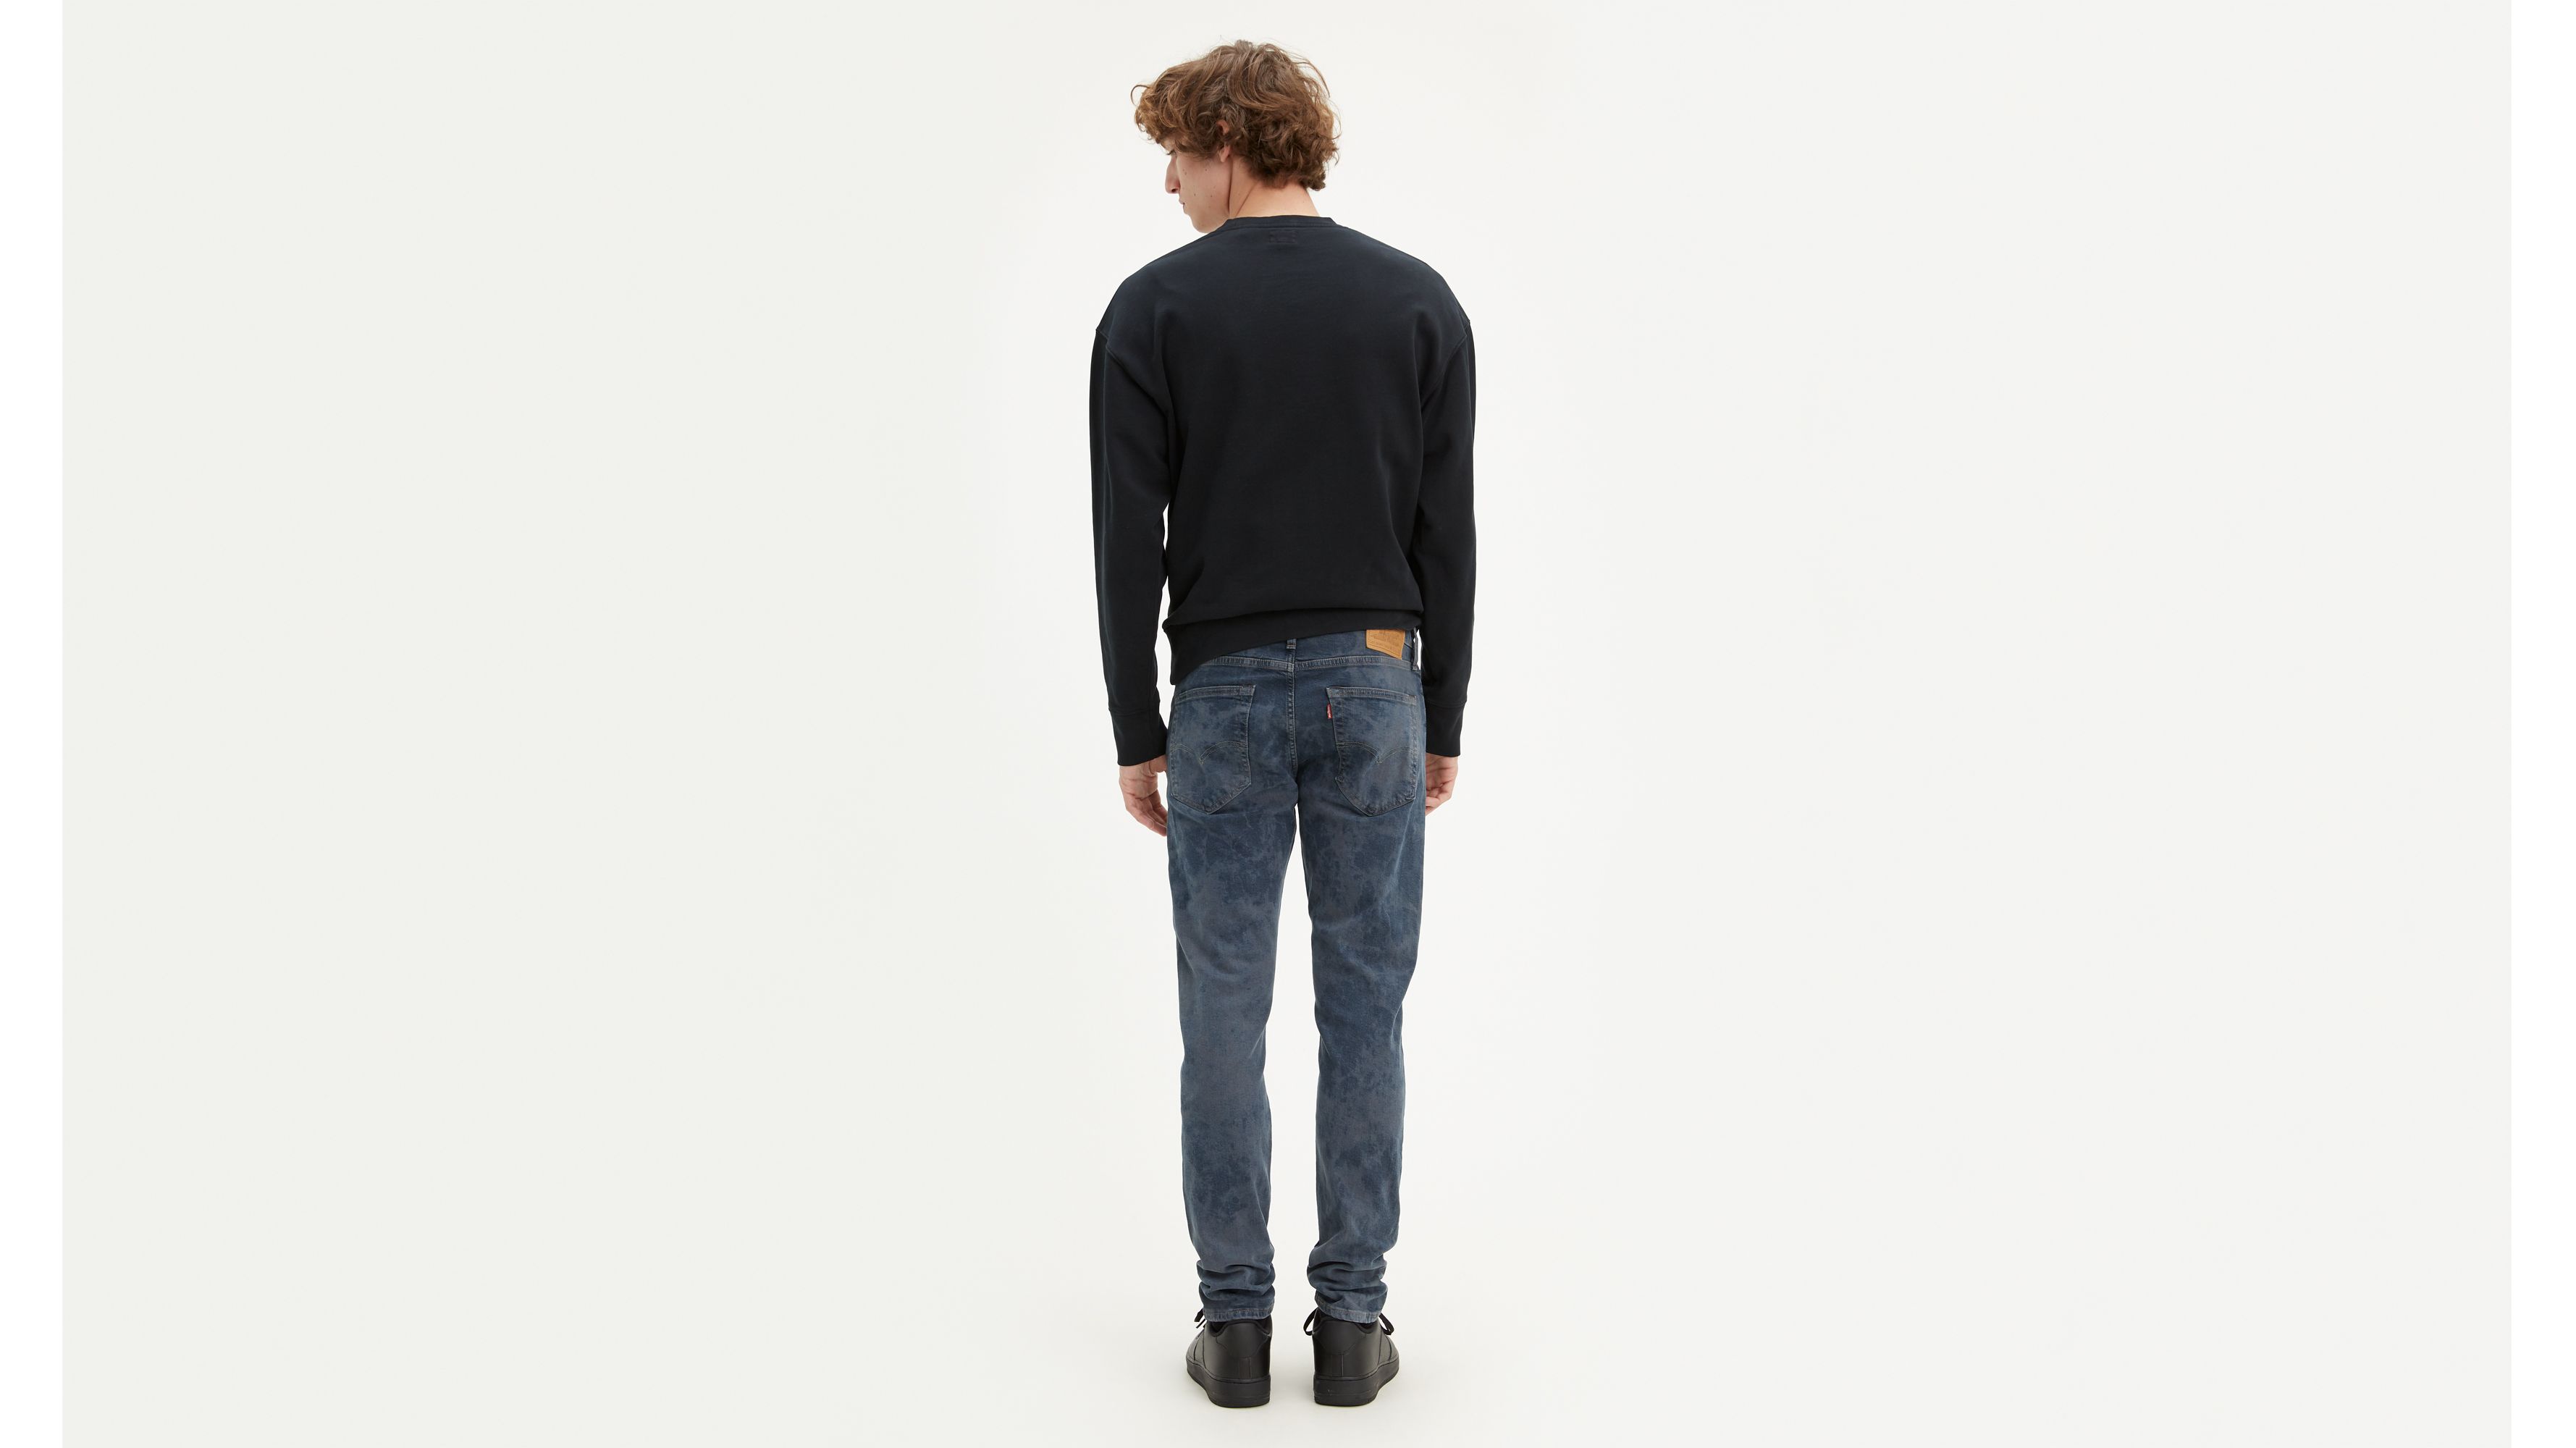 levis tapered mens